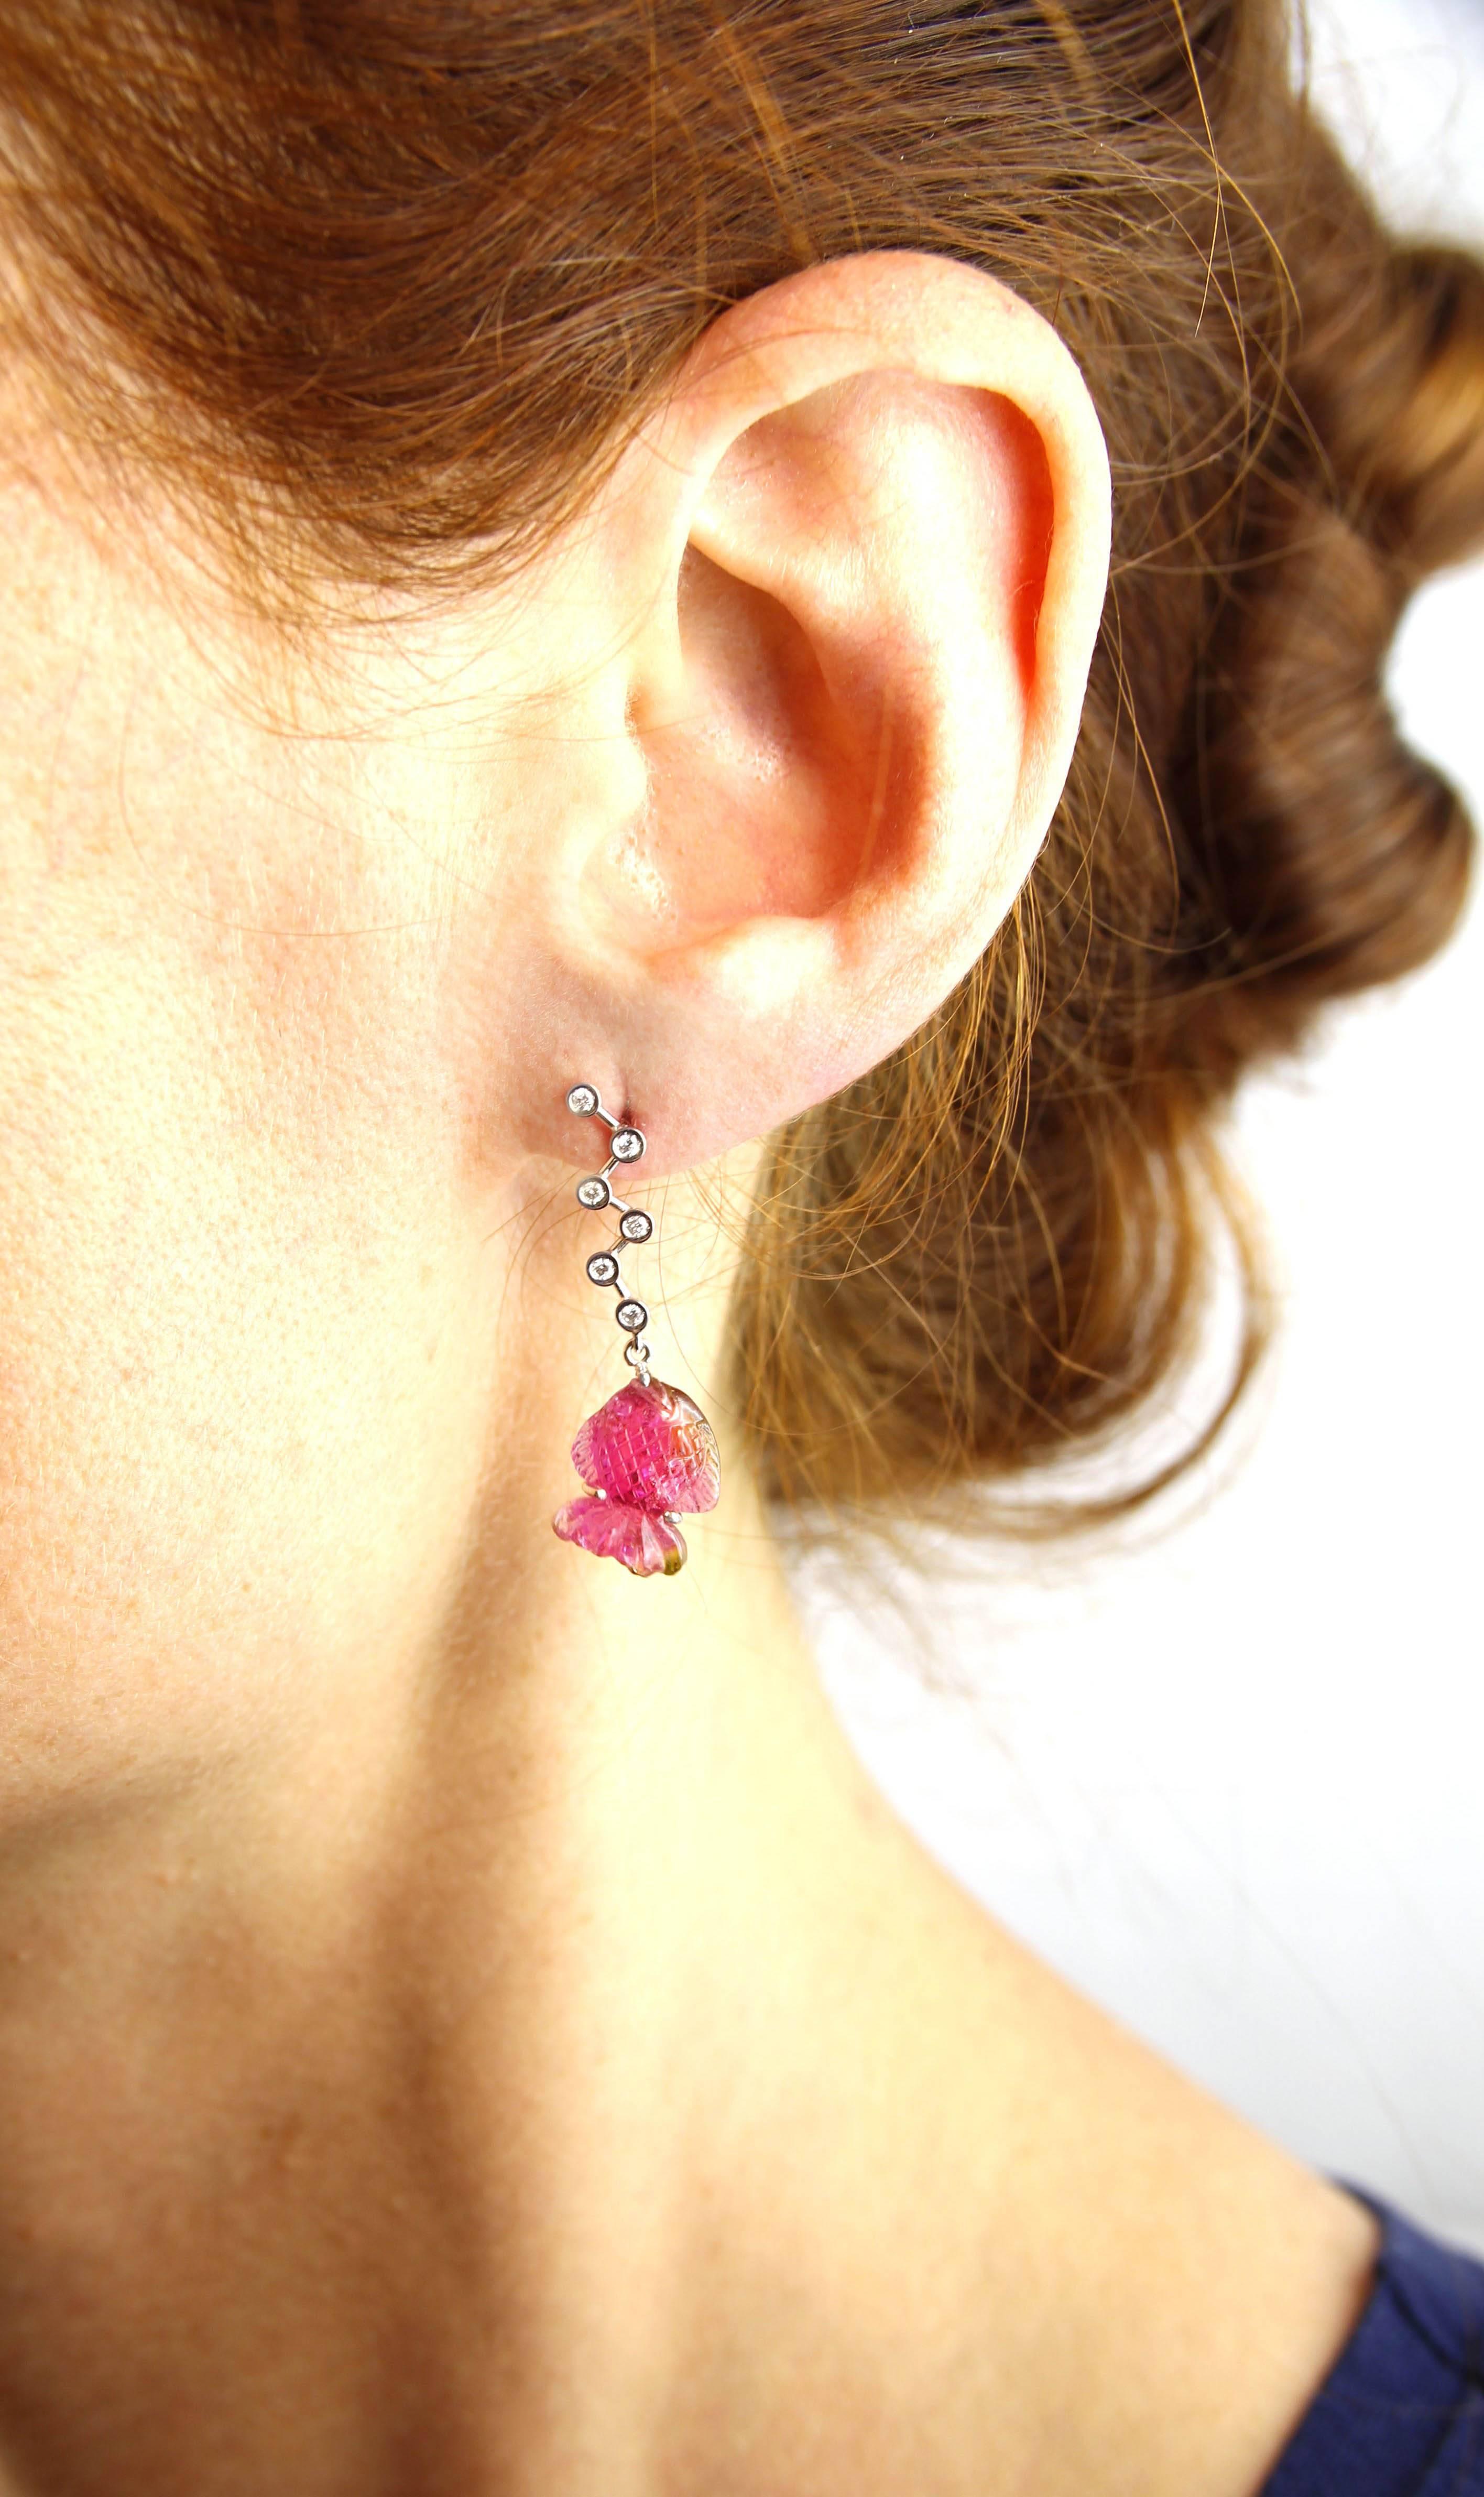 Jona design collection, hand crafted in Italy, 18 karat white gold dangle earrings, consisting of 2 fish-carved pink tourmalines, hanging from 0.13 carats of white diamond bubbles. 
All Jona jewelry is new and has never been previously owned or